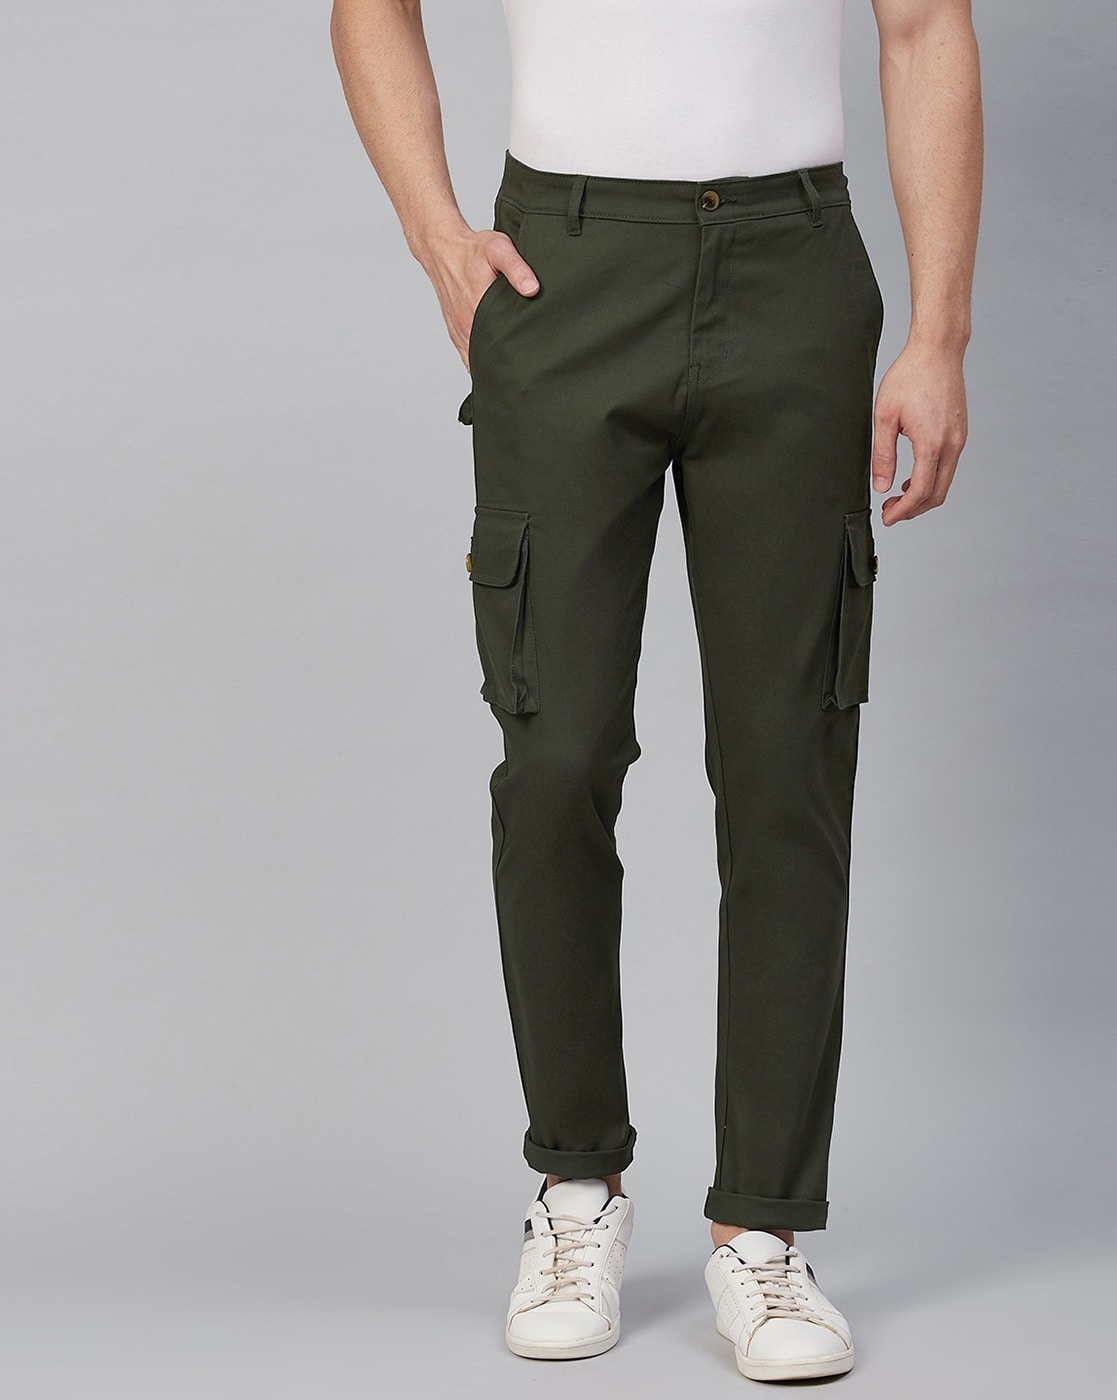 Buy The Souled Store Solid Mint Men Cargo Pants Online